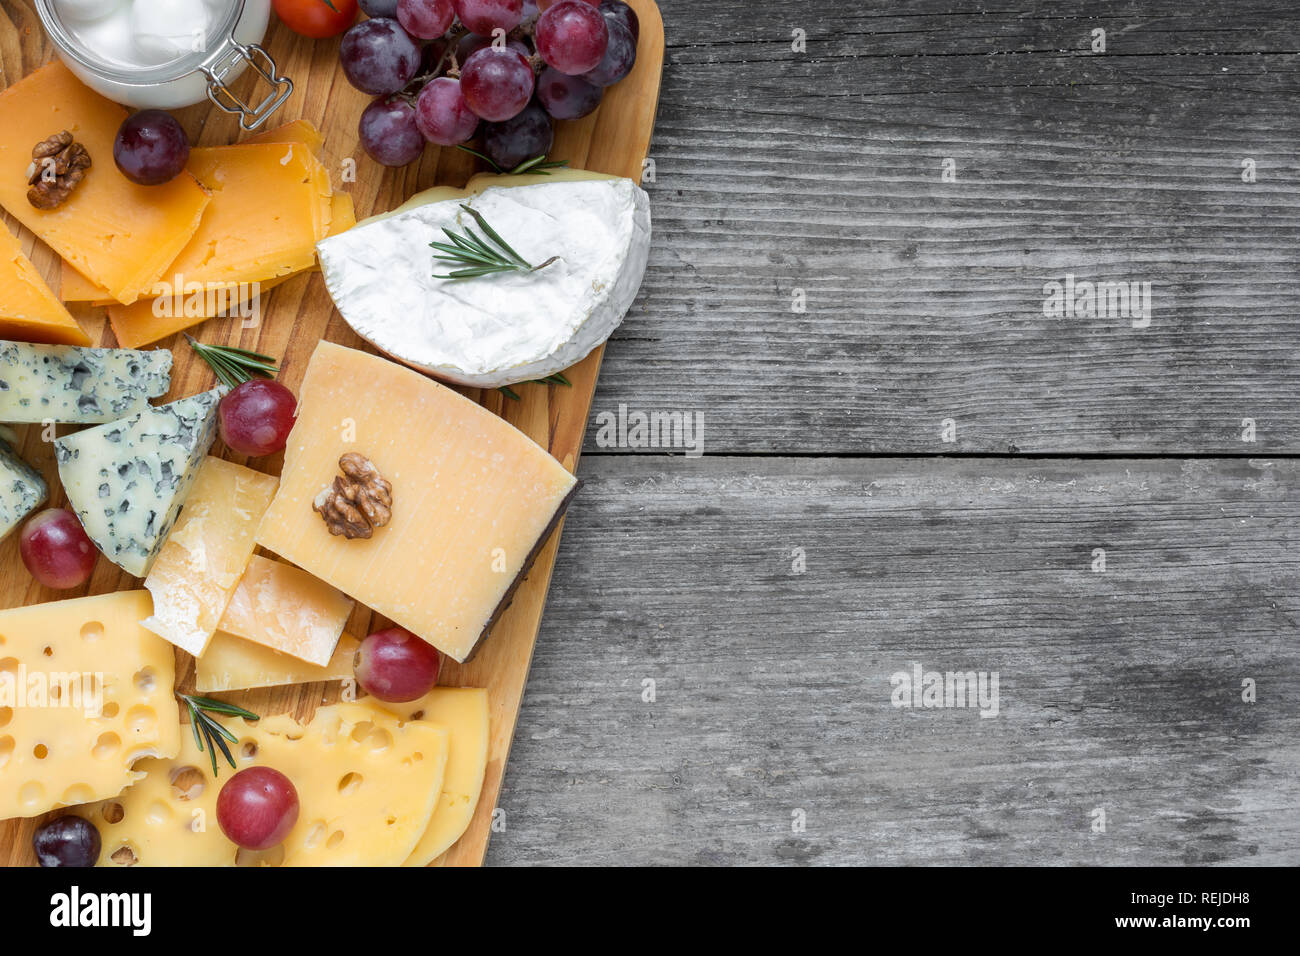 Assorted cheeses on wooden board plate served with walnuts, grapes and rosemary on rustic wood background, top view with copy space Stock Photo